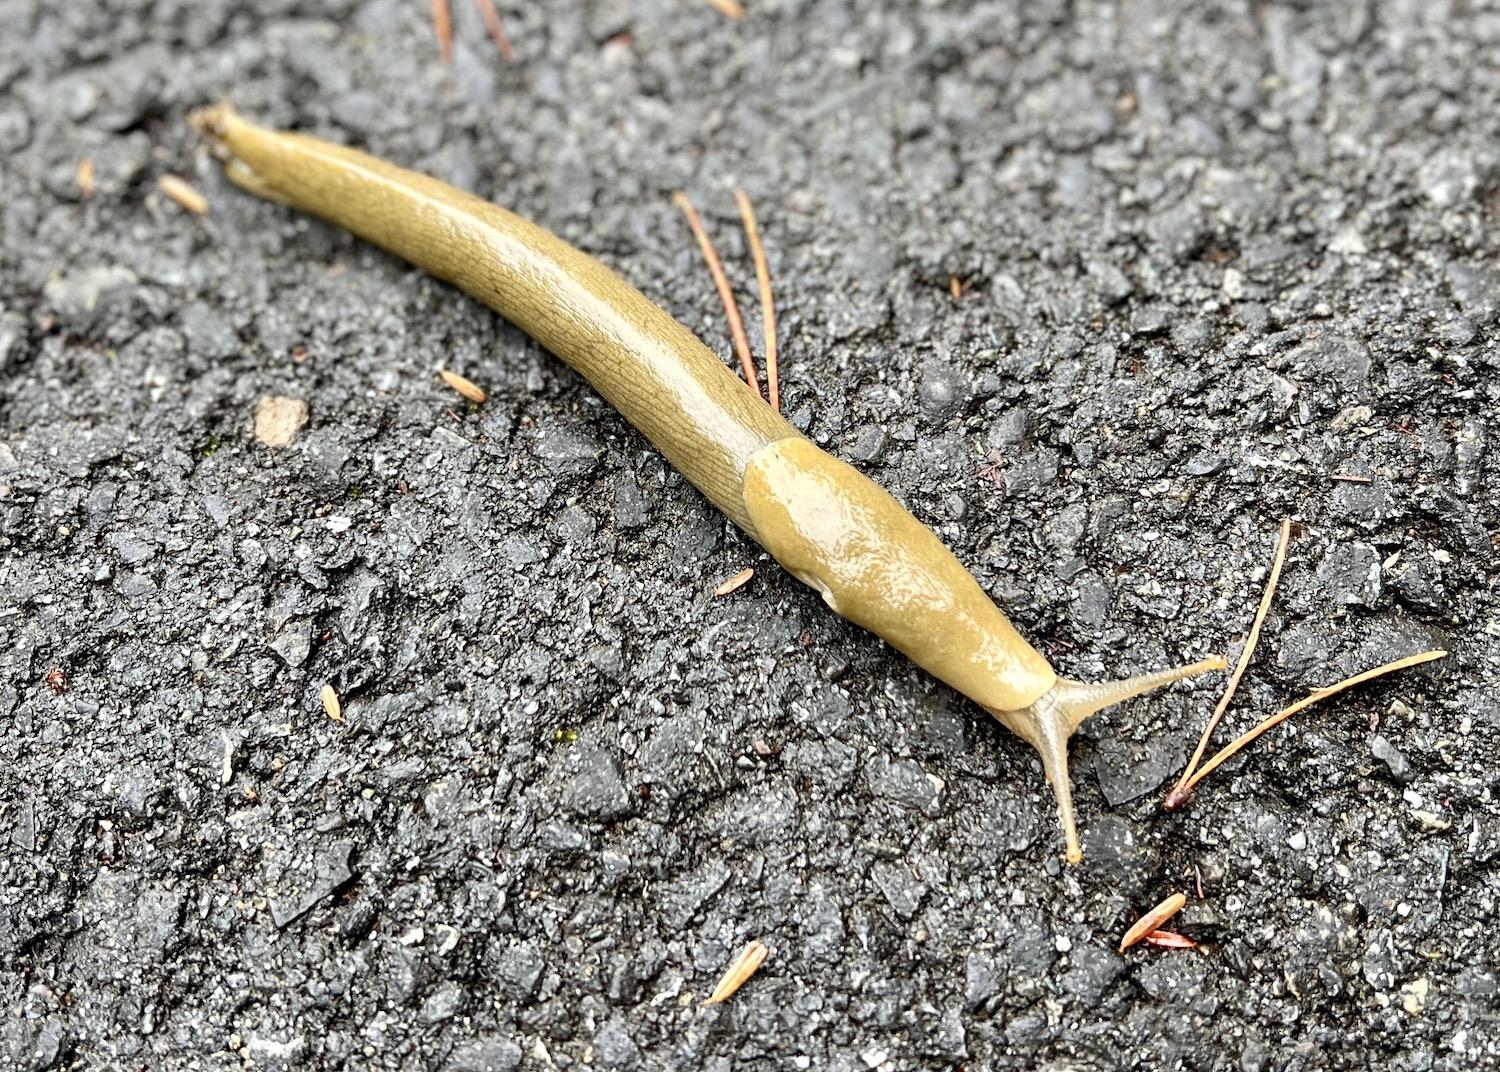 Another banana slug stretches out on Pacific Rim's multi-use pathway looking for food.